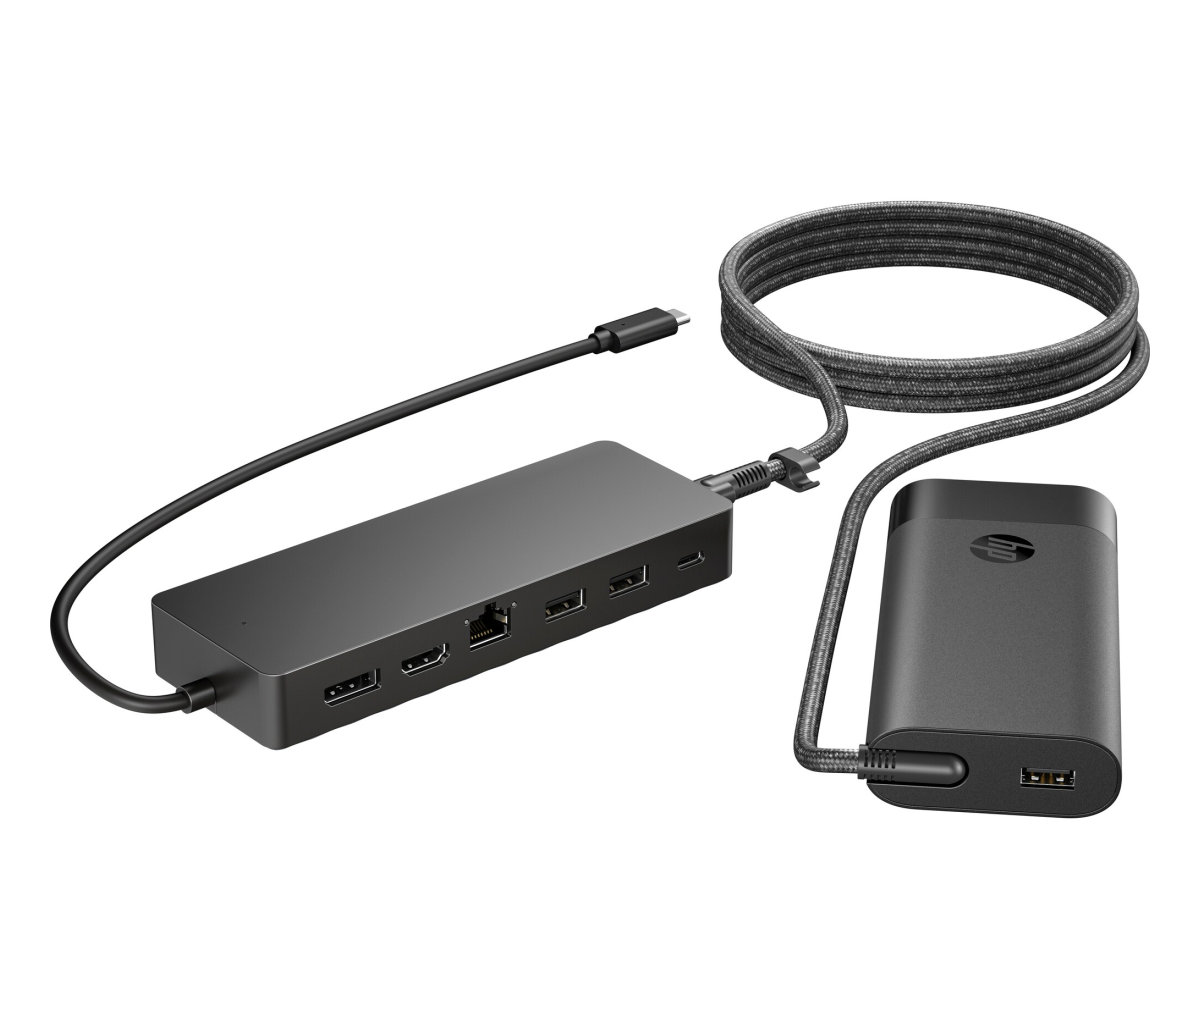 HP Universal USB-C Hub and Laptop Charger Combo (9H0H9AA#ABB)